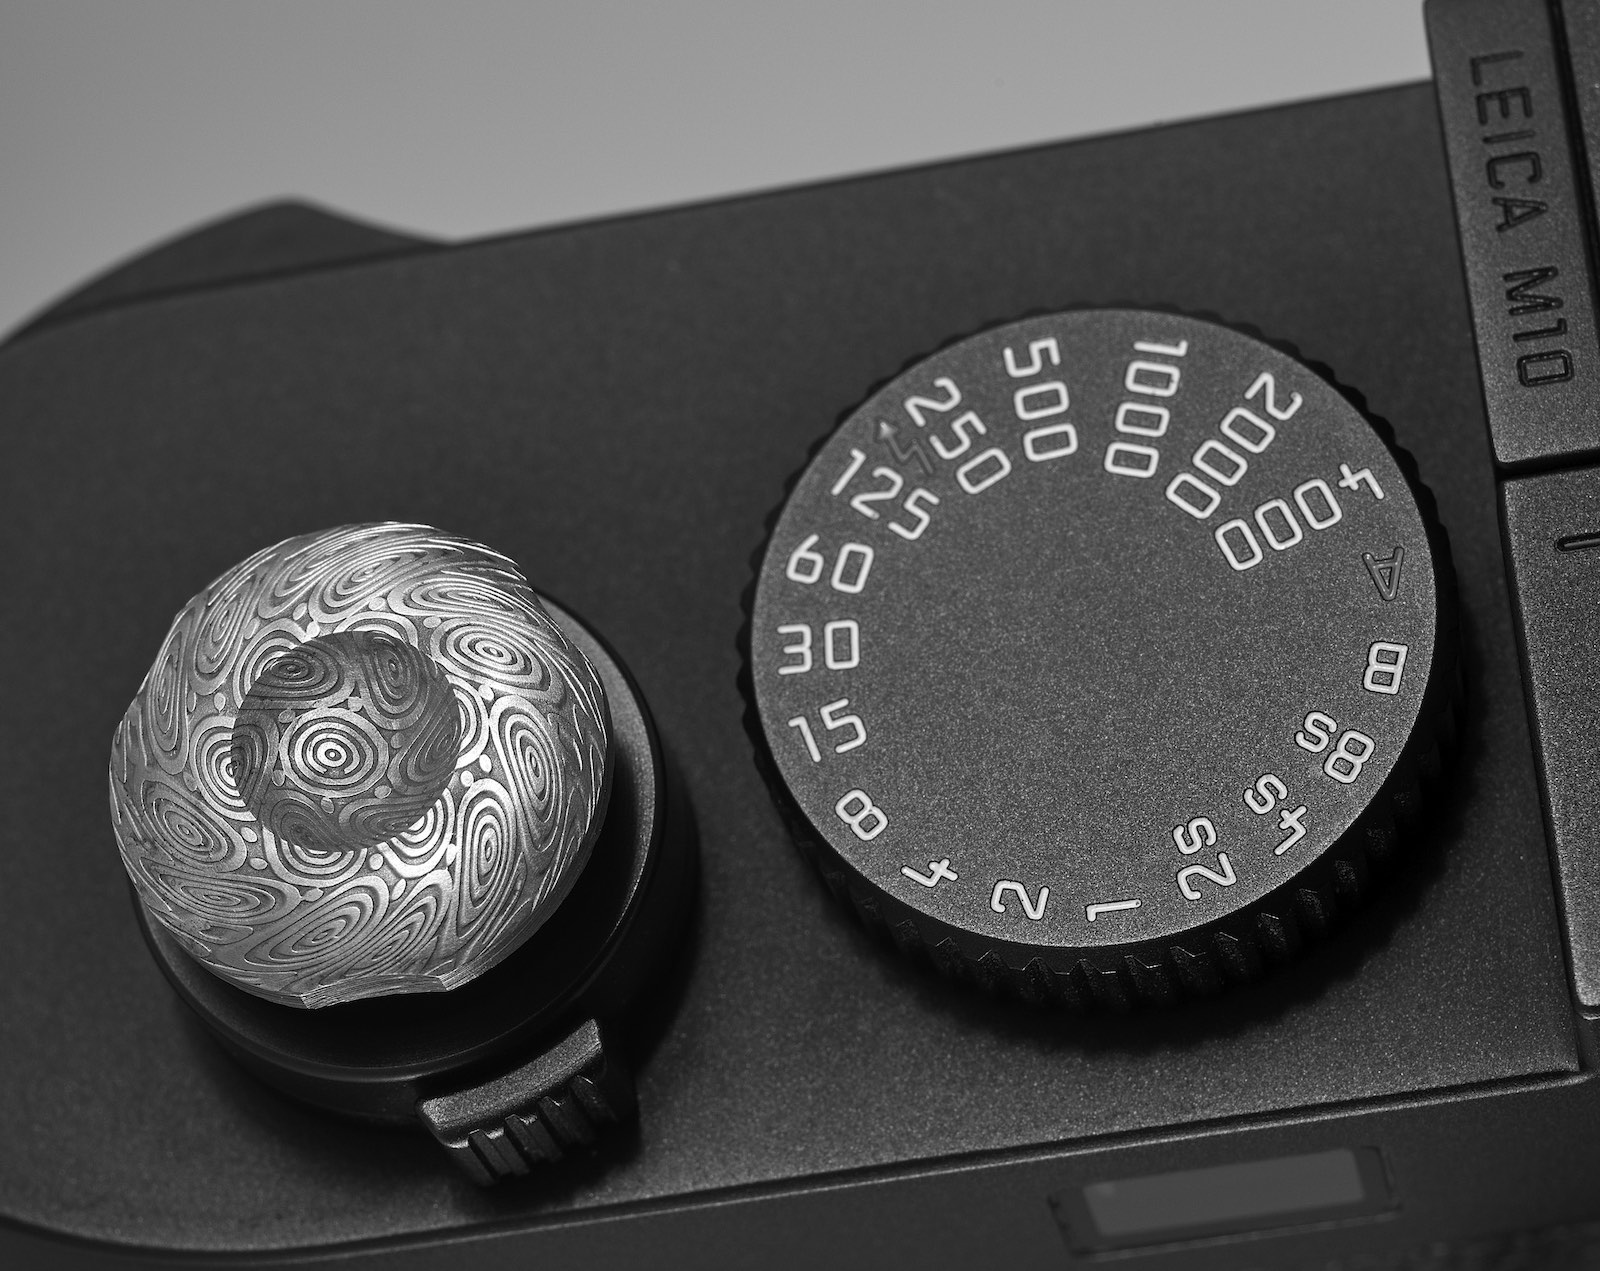 Sterling silver soft release buttons for Leica cameras - Leica Rumors